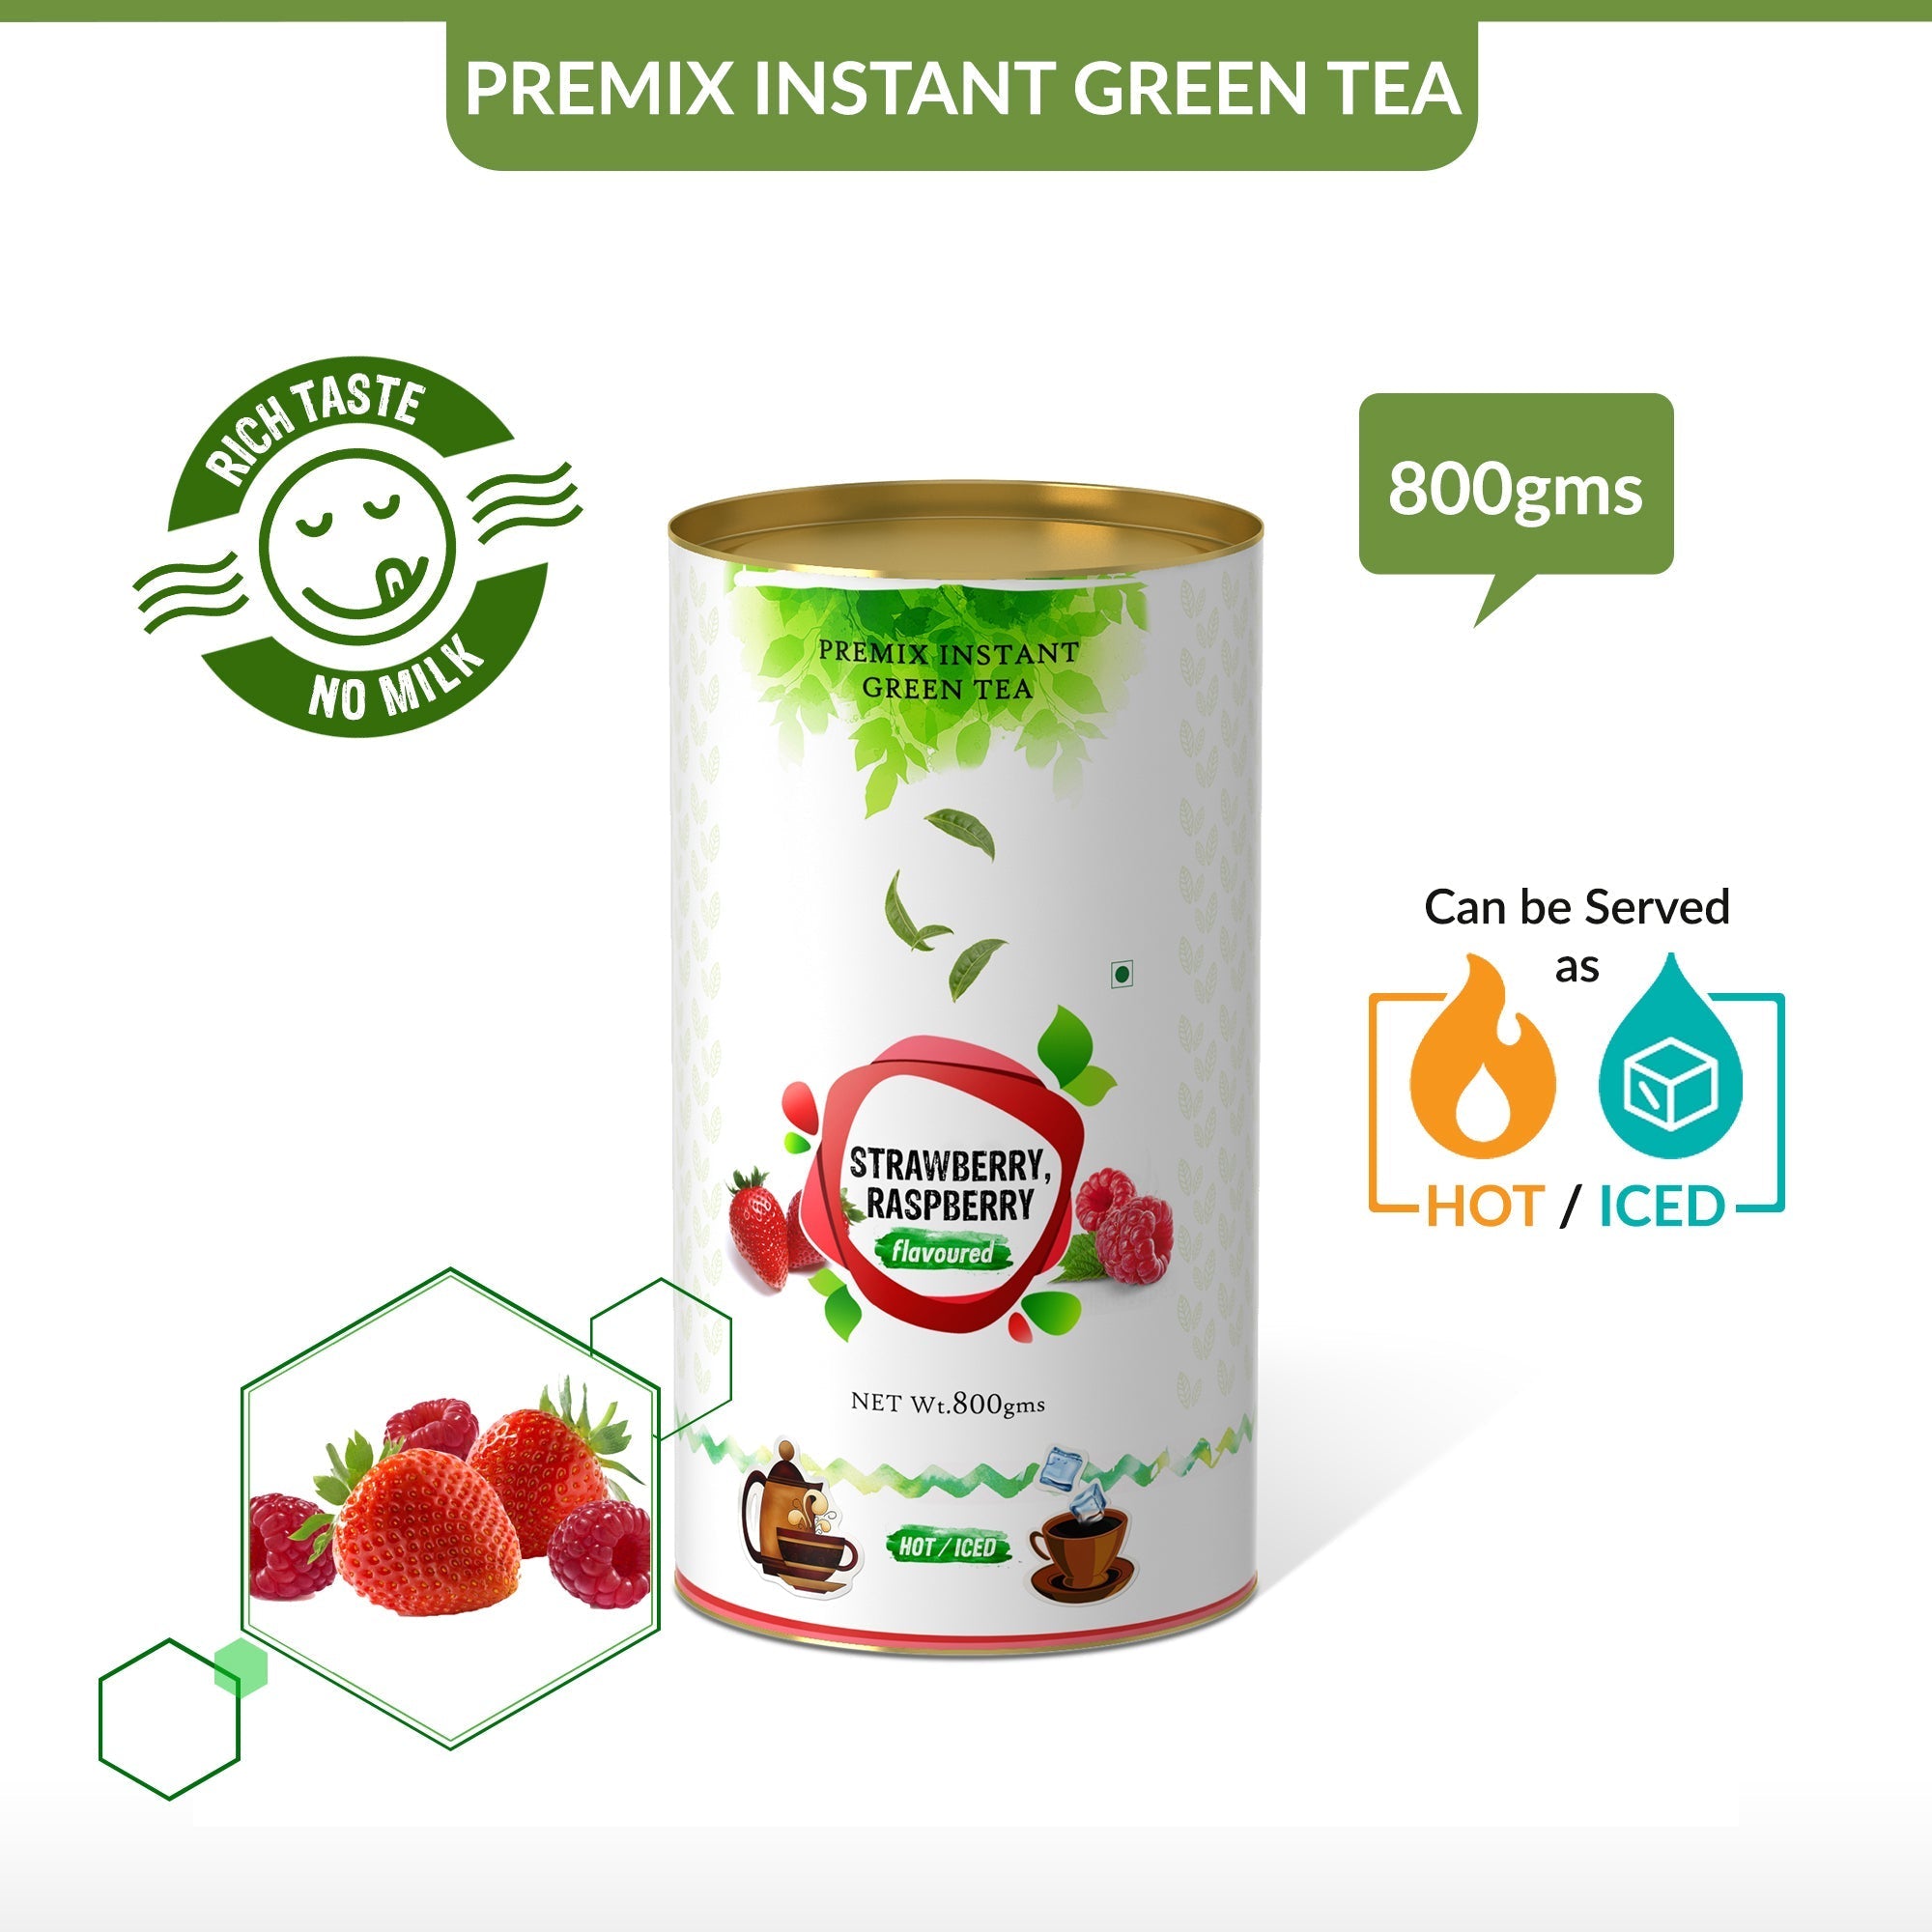 Strawberry & Raspberry Flavored Instant Green Tea - 800 gms